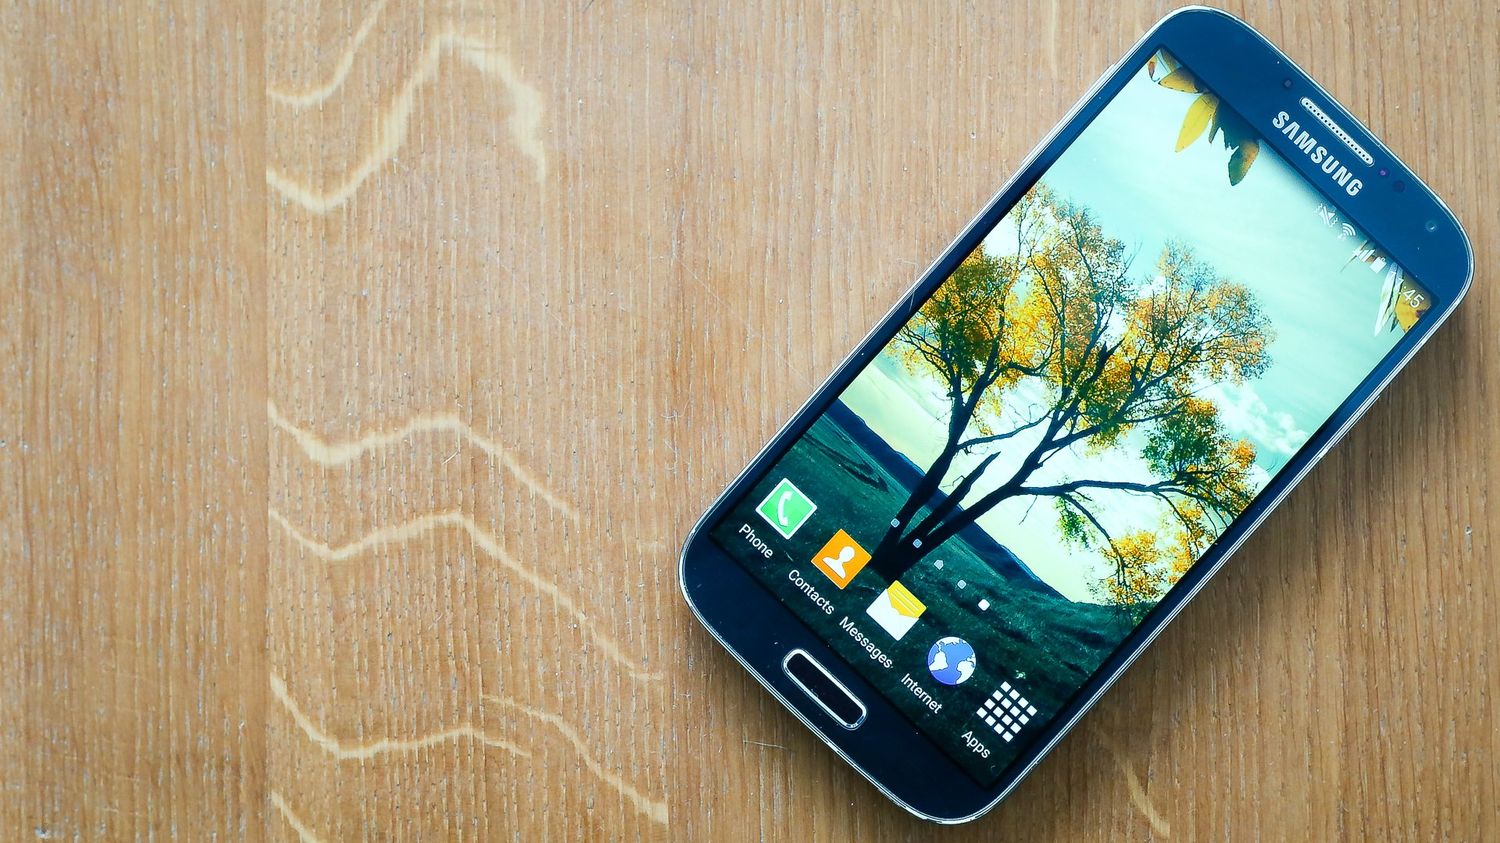 samsung-galaxy-s4-rumored-for-an-april-release